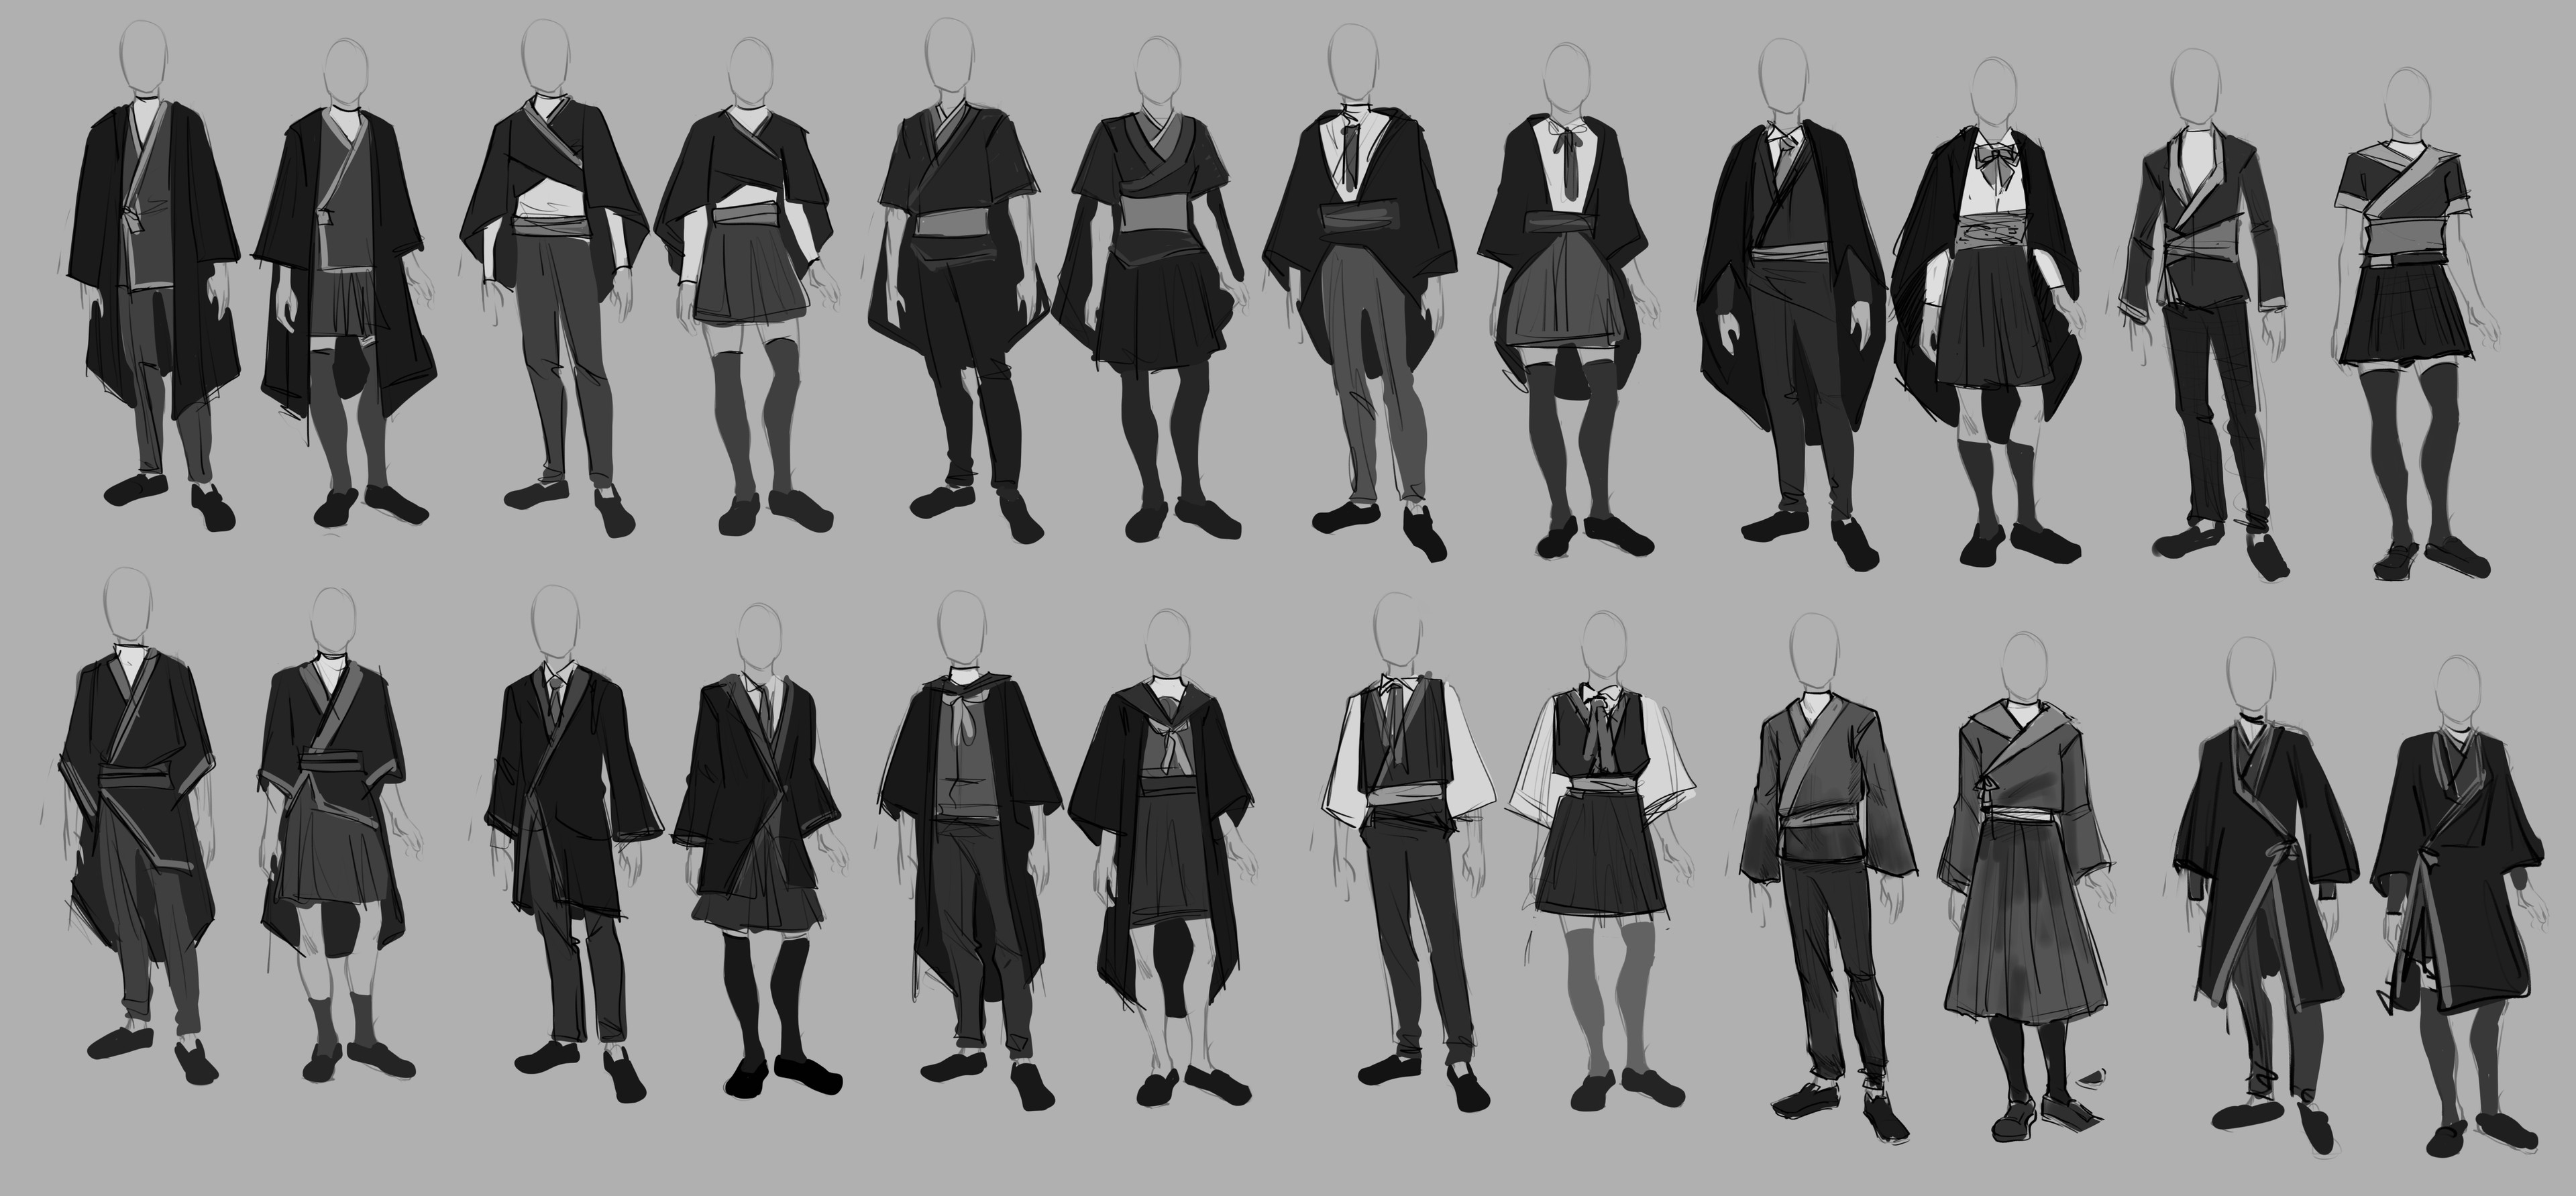 At the start I didn’t know what kind of school it would be, so I tried different approaches with a more traditional style + modern uniform.